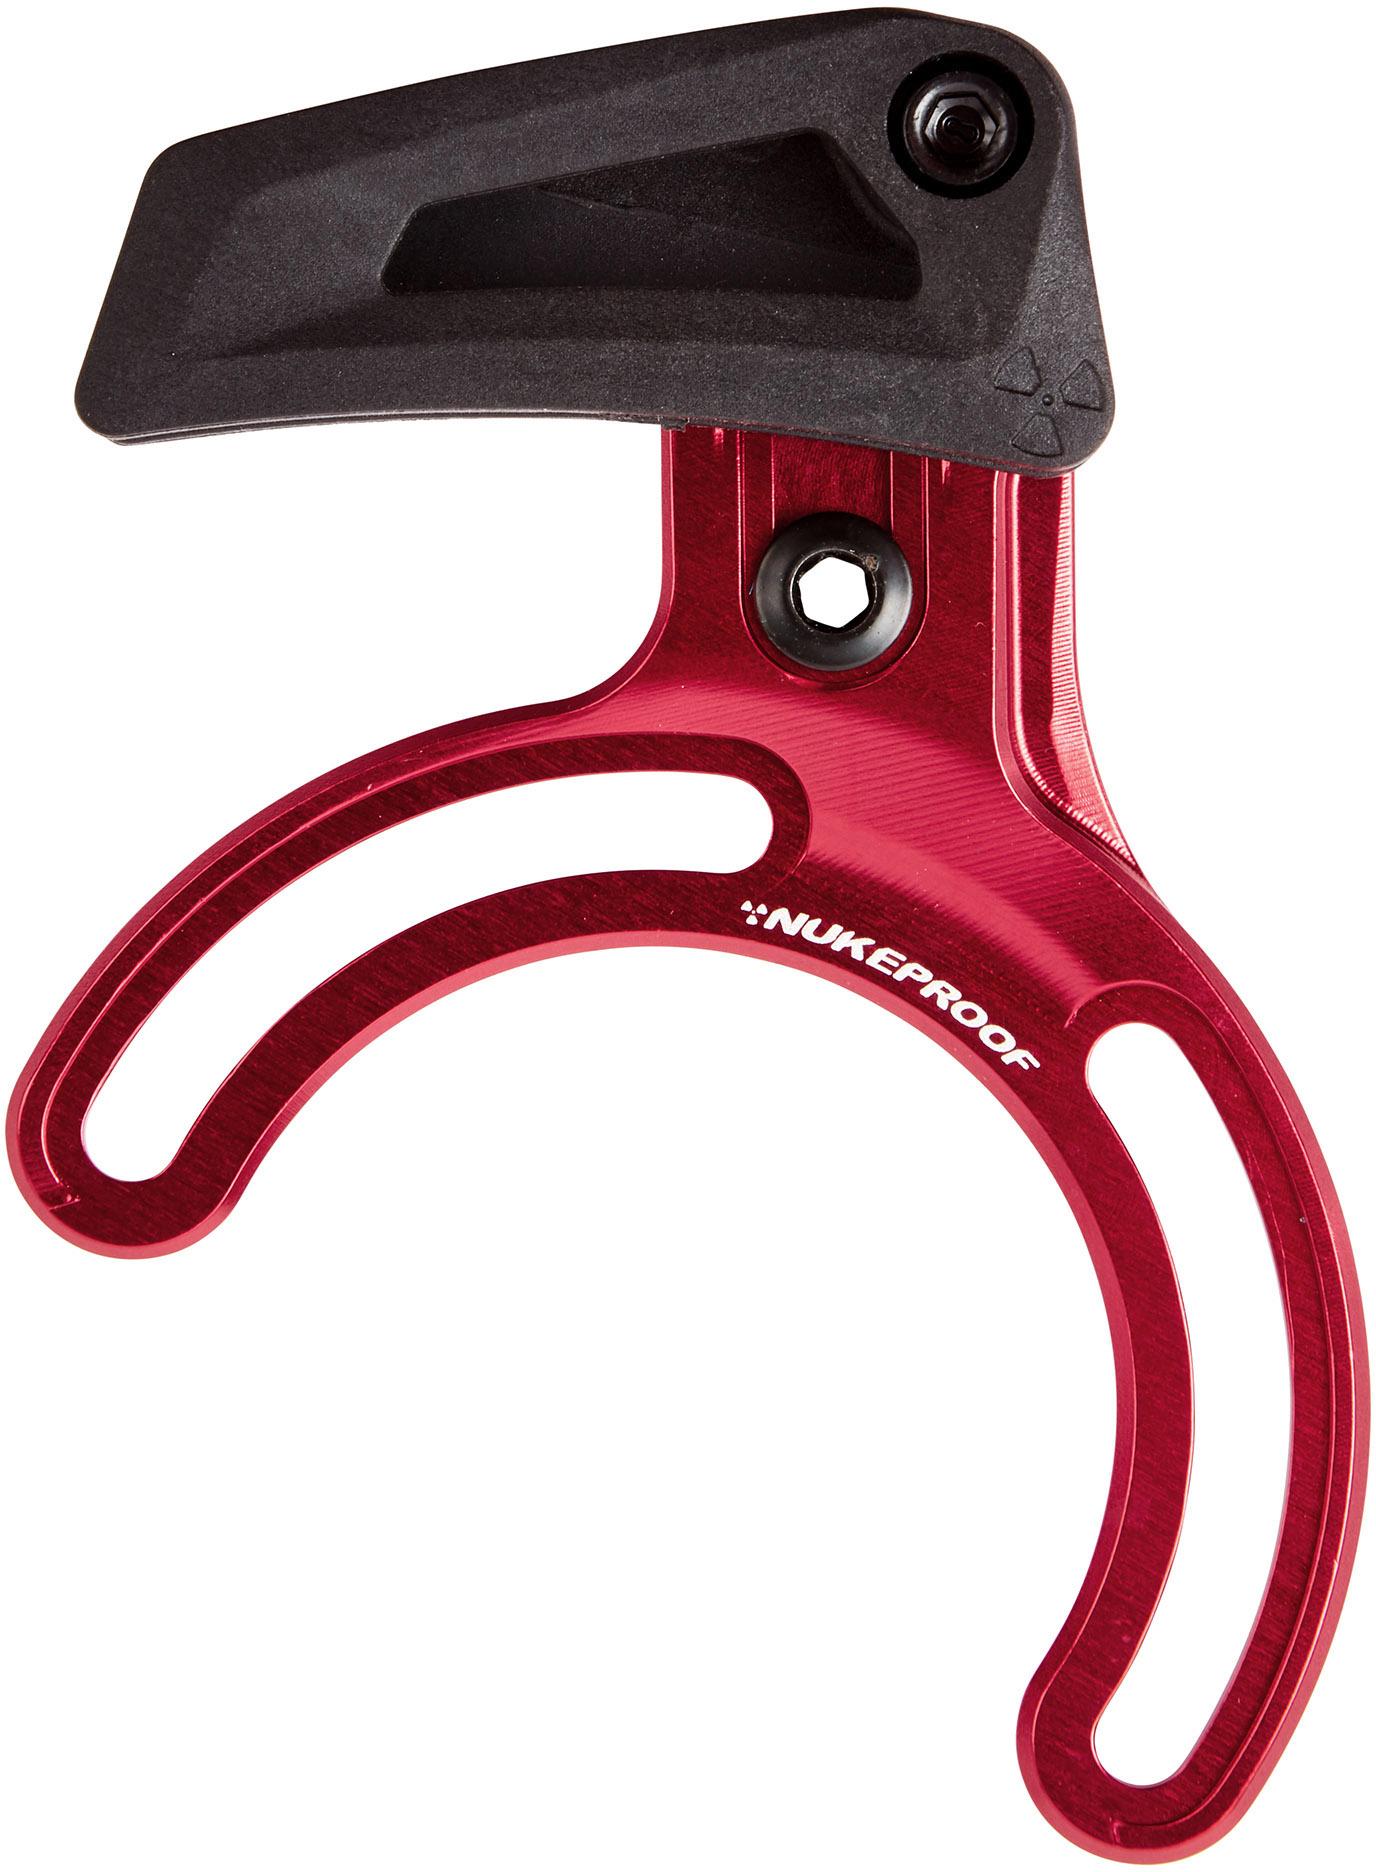 Nukeproof Shimano Steps Mount Chain Guide - Red